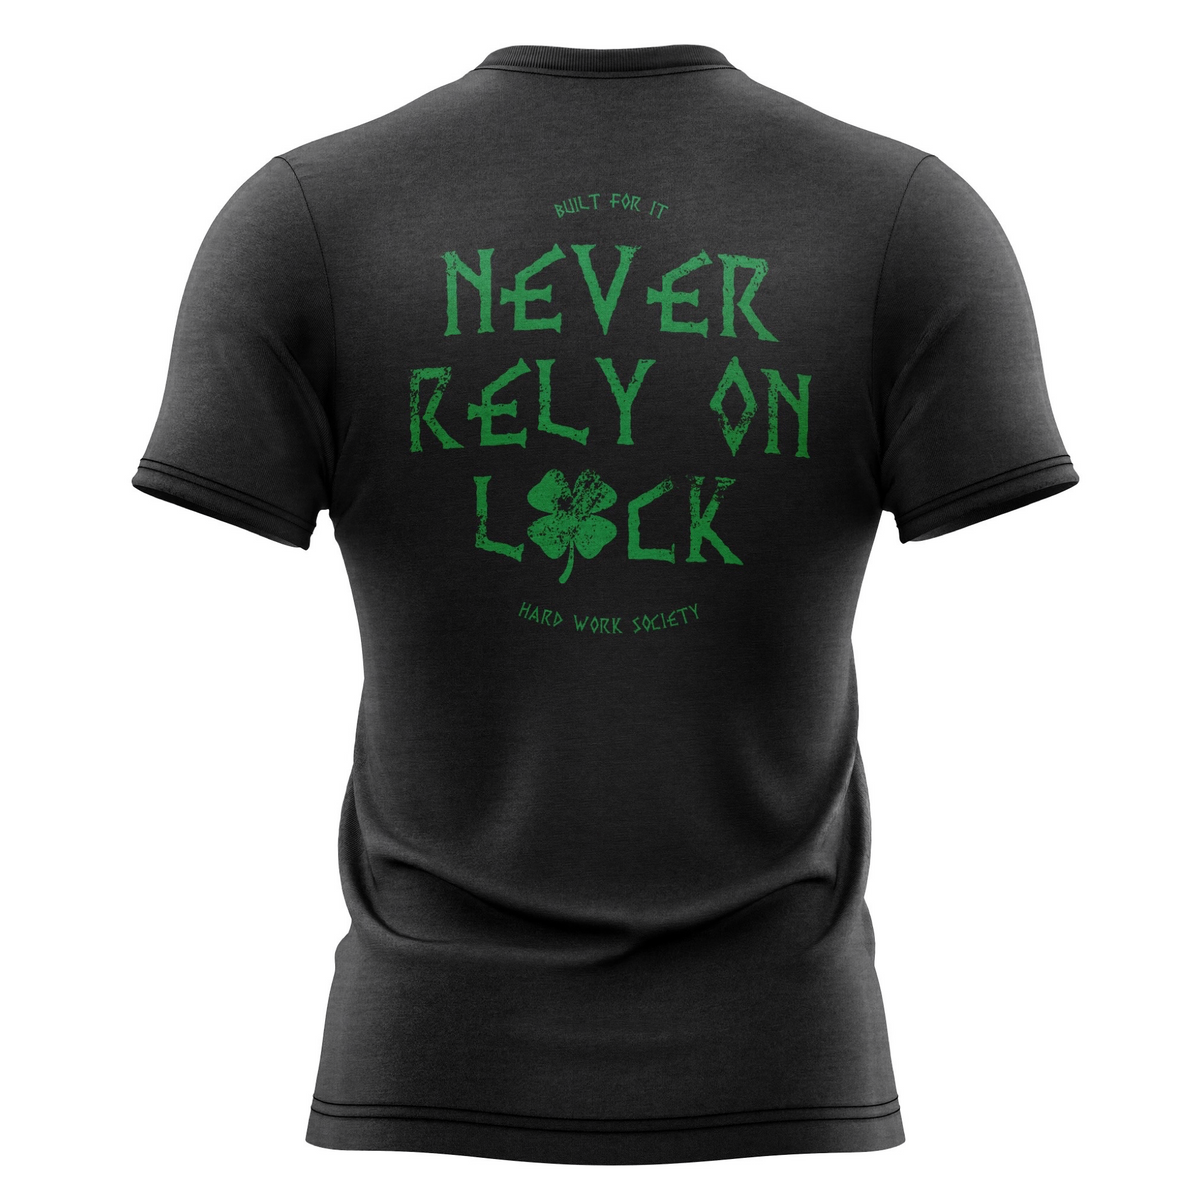 Never Rely On Luck T-Shirt